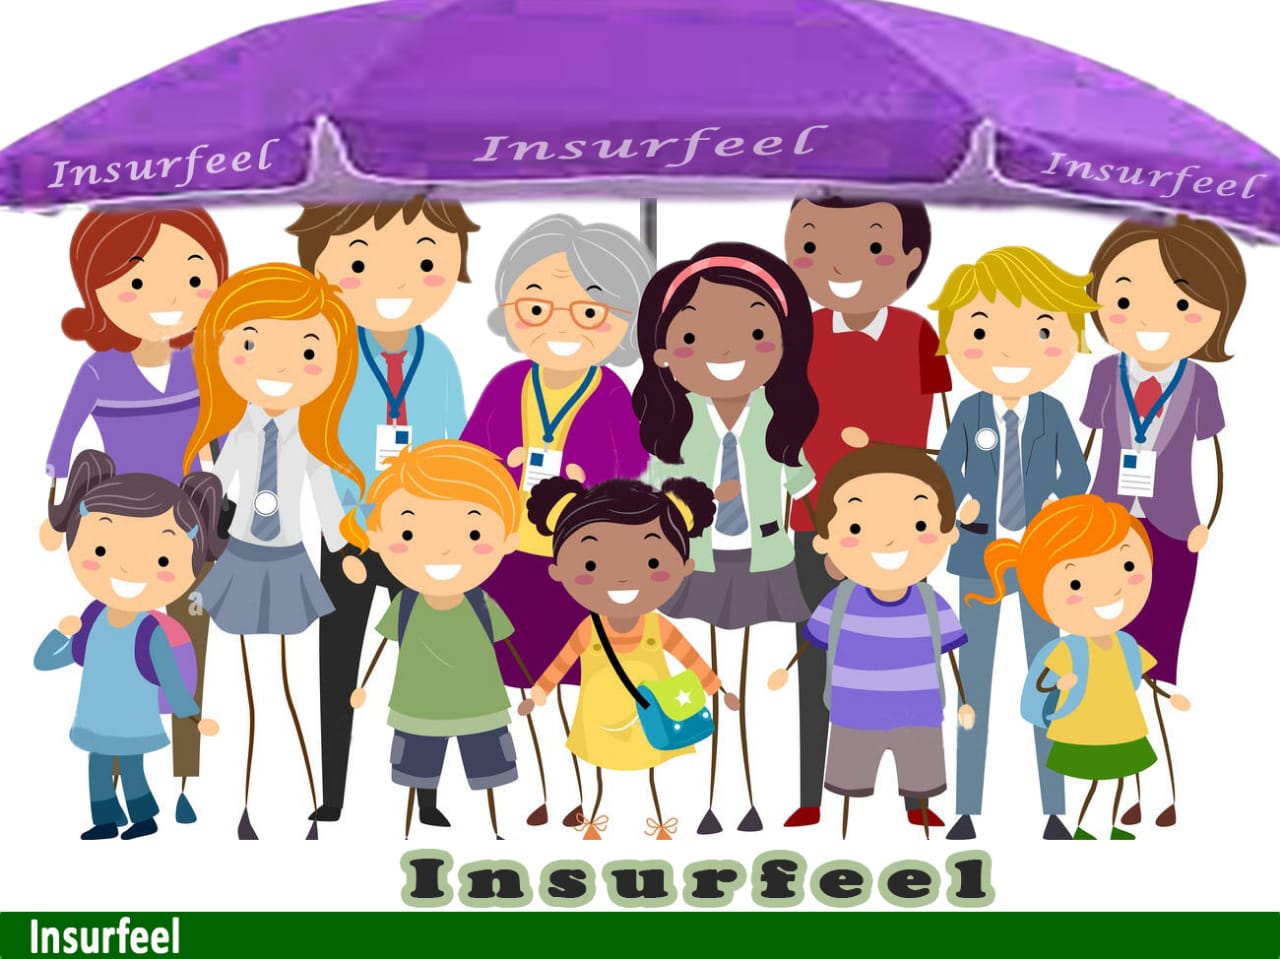 Insurfeel Initiative: We donate insurance covers and encourage others to donate too.